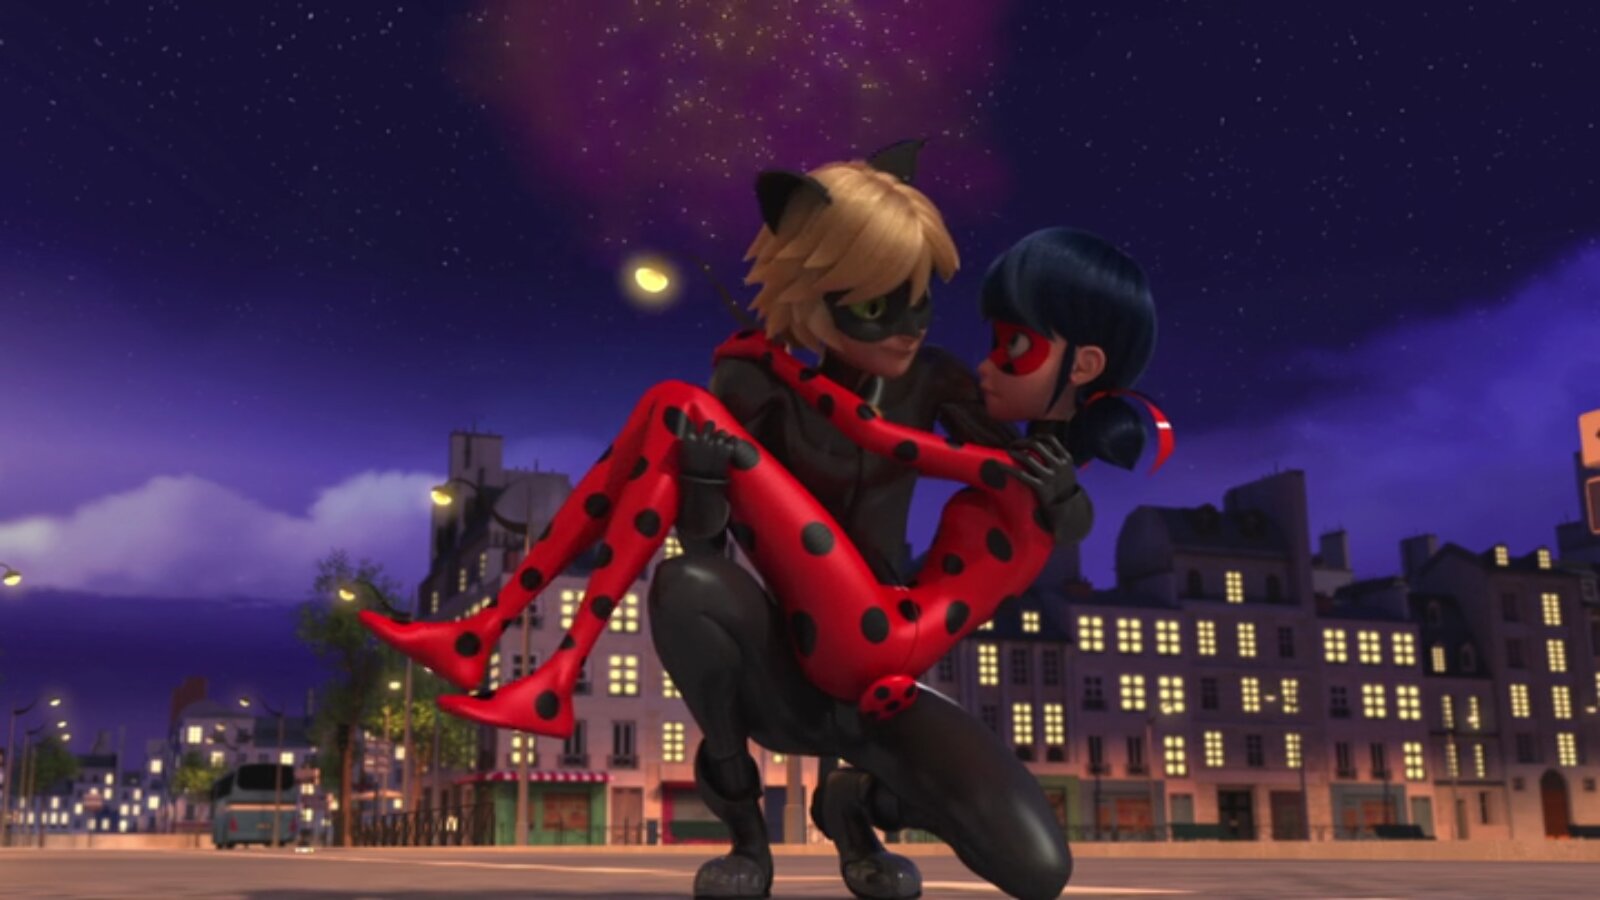 Series Overview: Miraculous Ladybug: The Tales of Ladybug & Cat